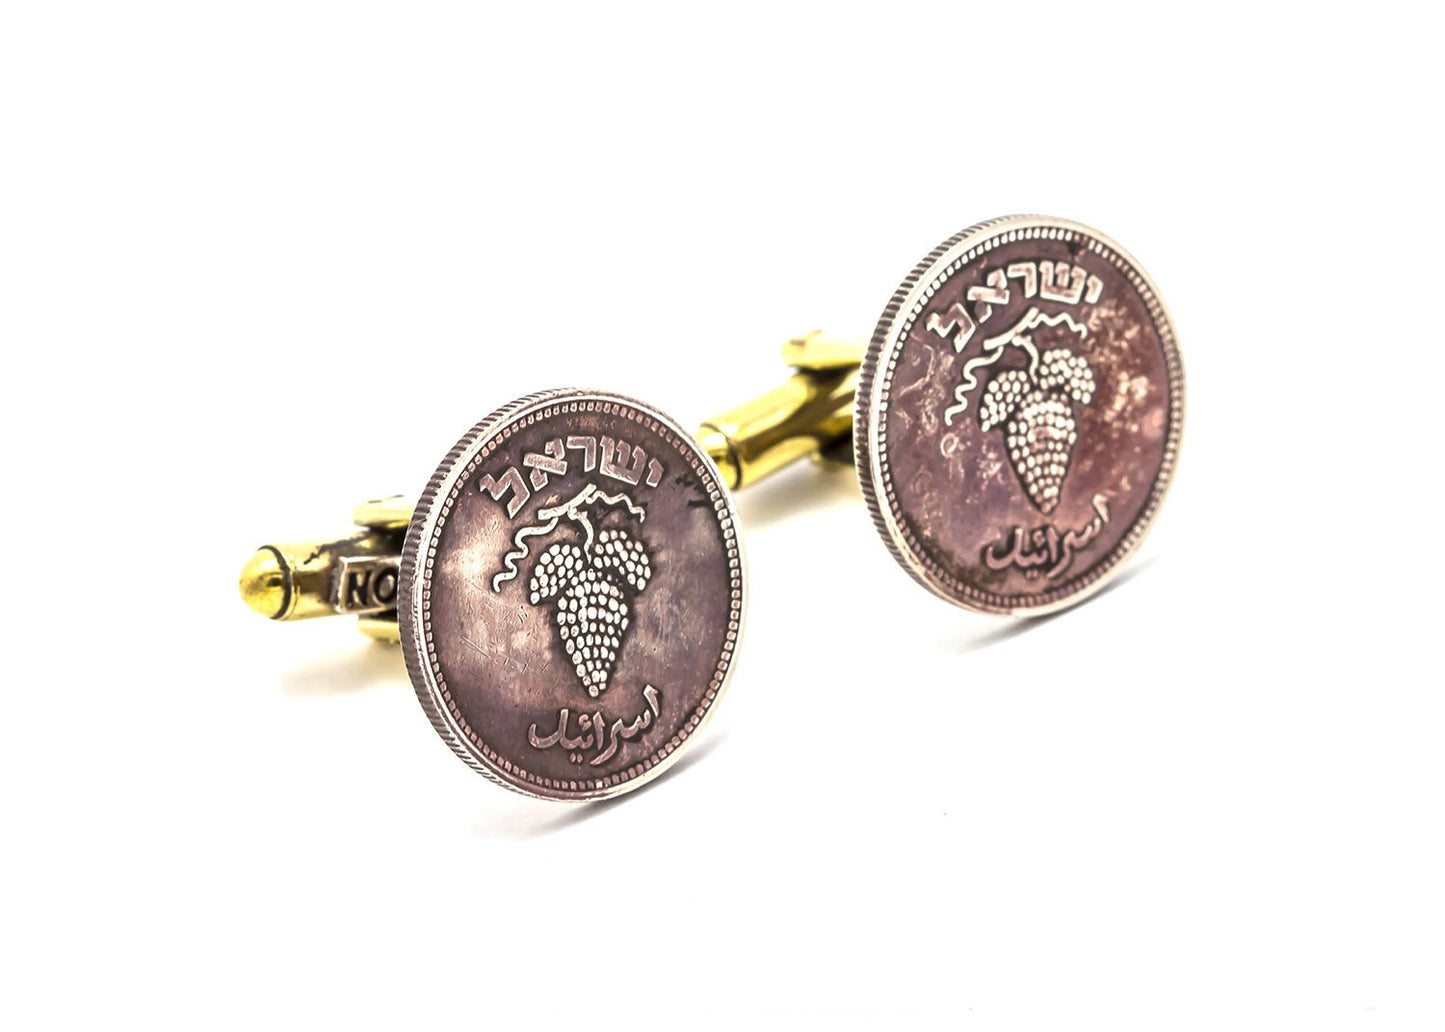 Israeli Coin Cufflinks with 25 pruta Old Coin of Israel